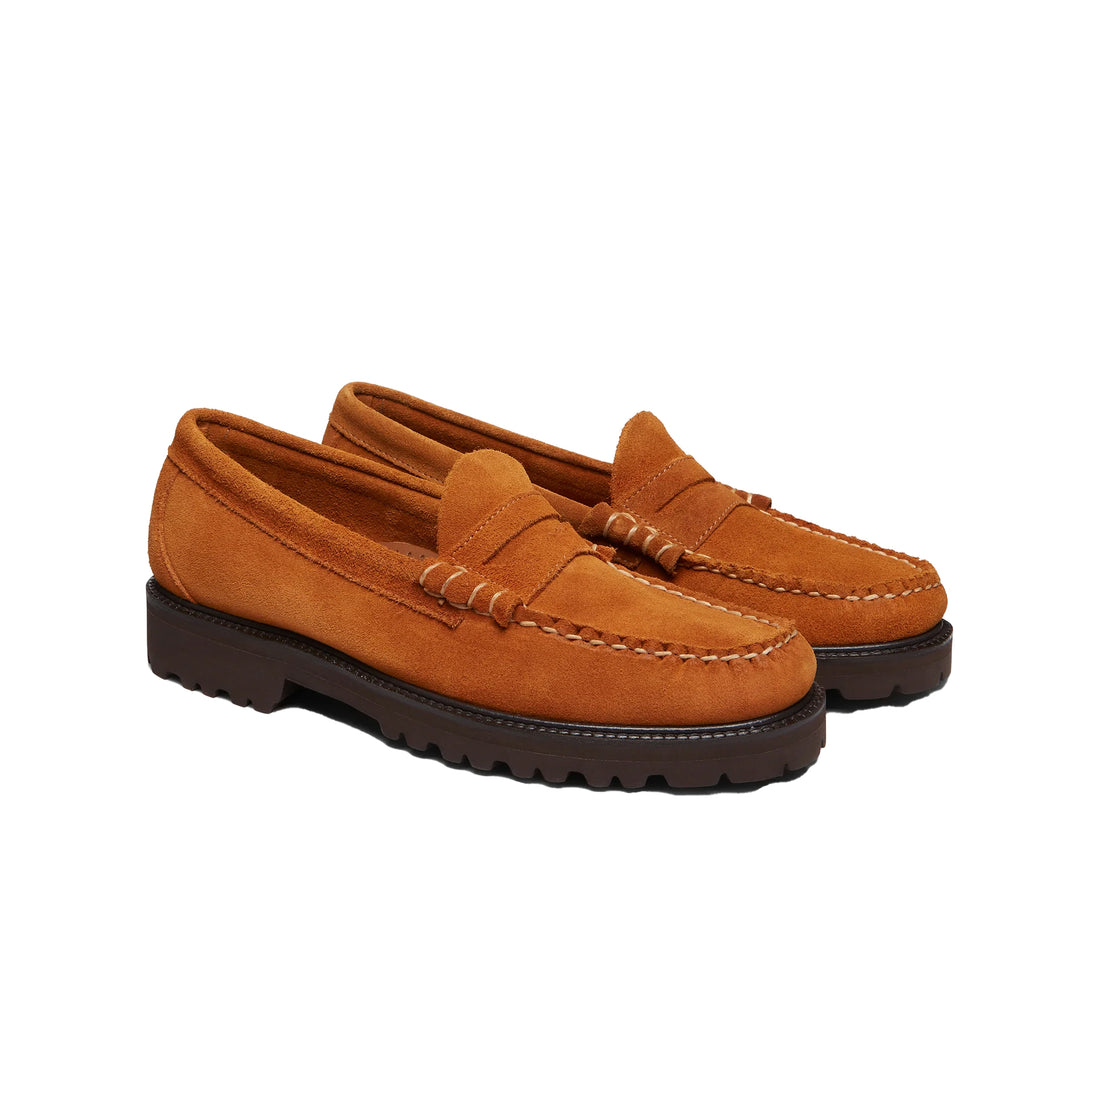 G.H Bass Weejuns 90s Larson Penny Loafers - Tan Suede – American ...